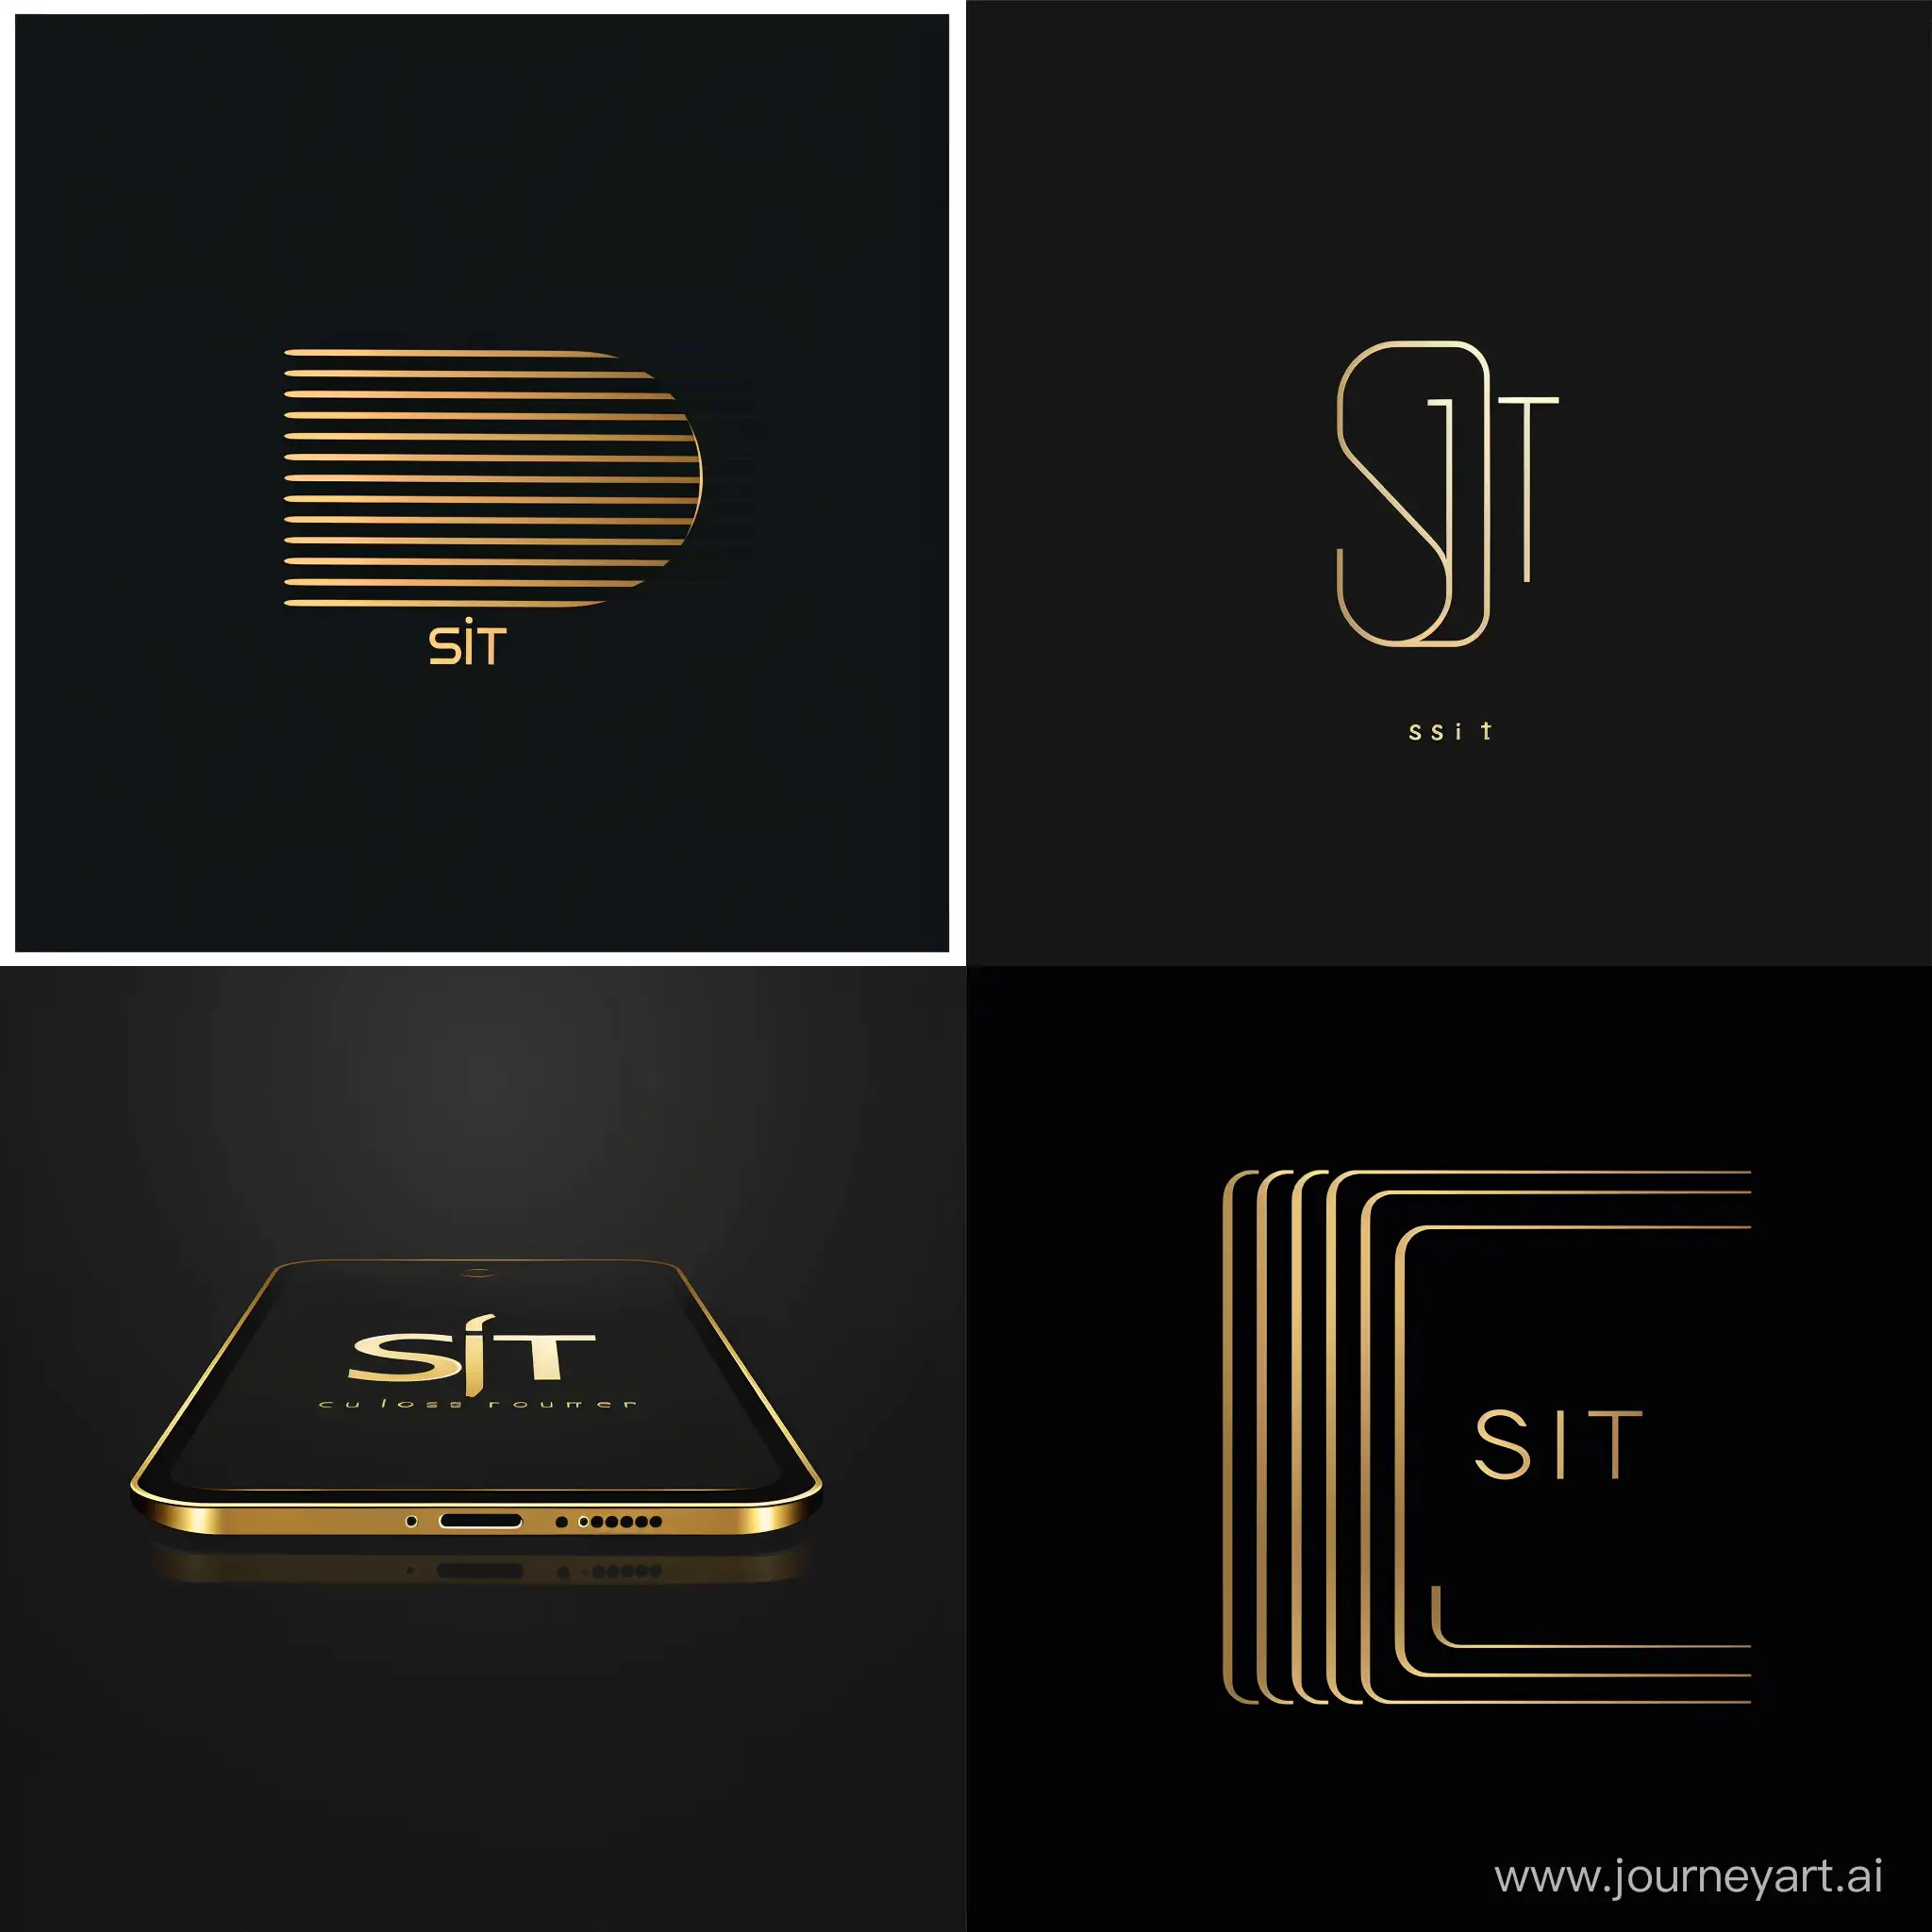 Modern-and-Sophisticated-SiT-Phone-Logo-in-Gold-and-Black